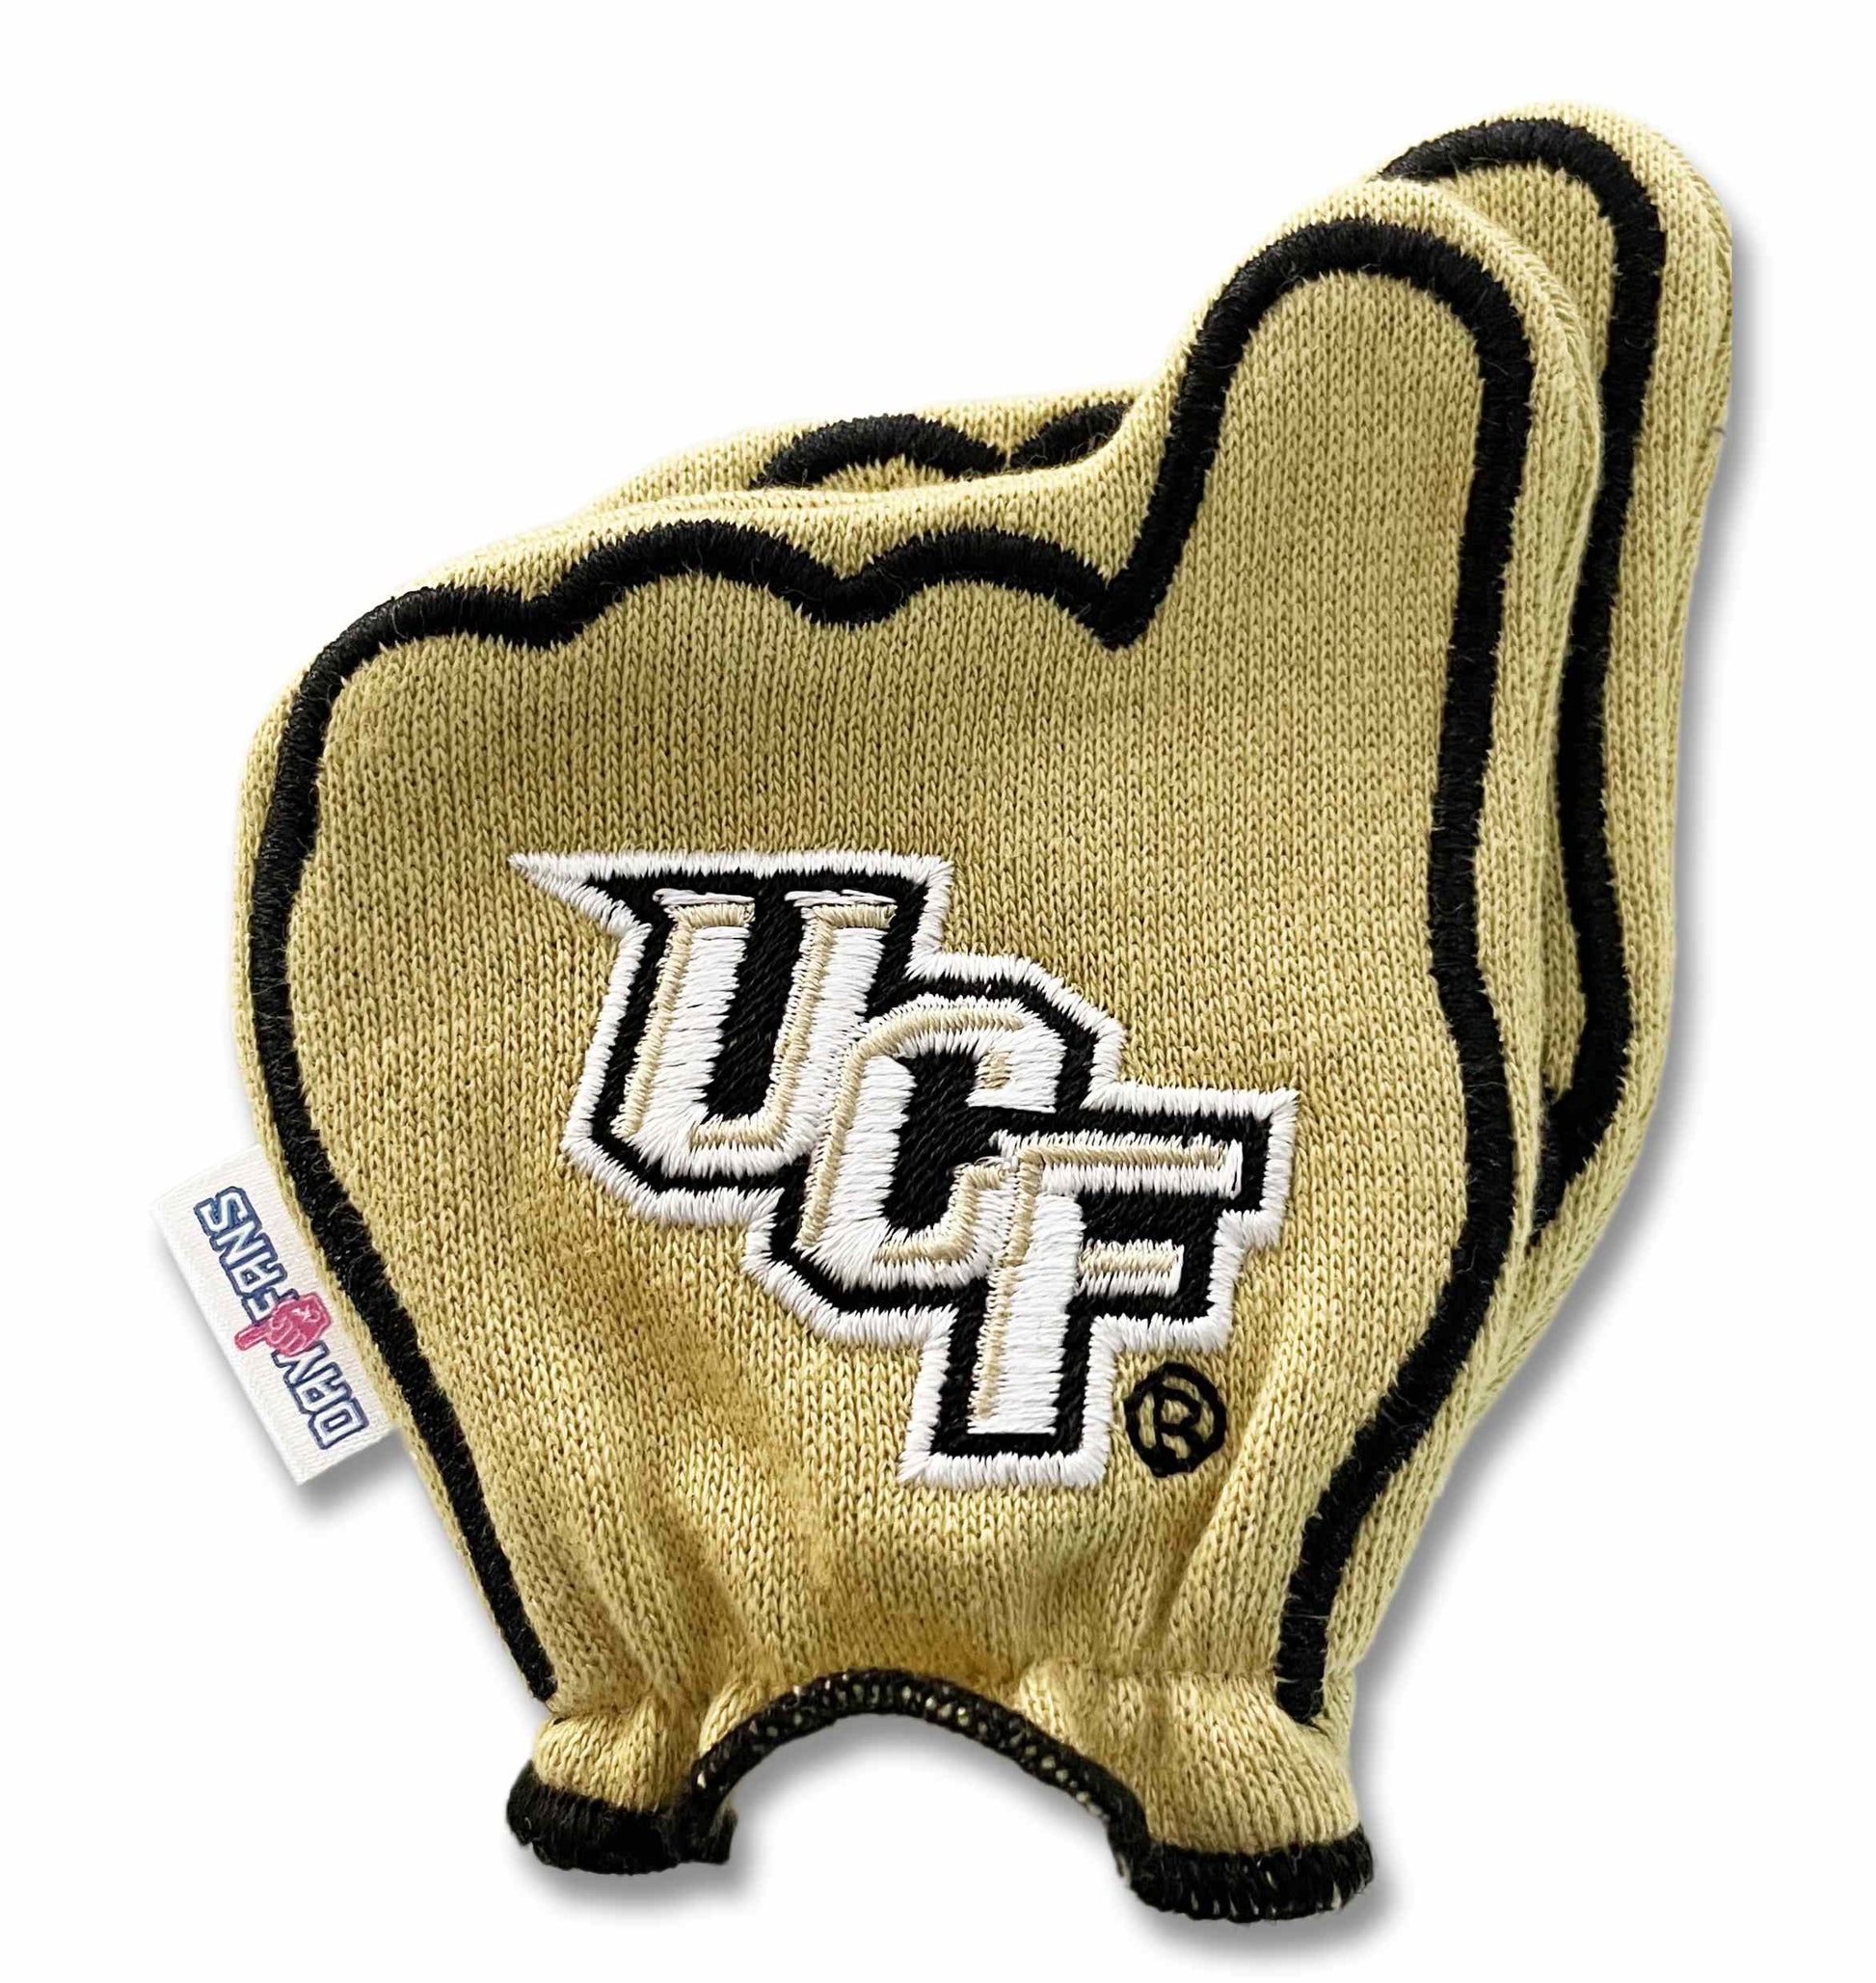 UCF Charge On FanMitts Baby Mittens Gold Back Pair Stacked